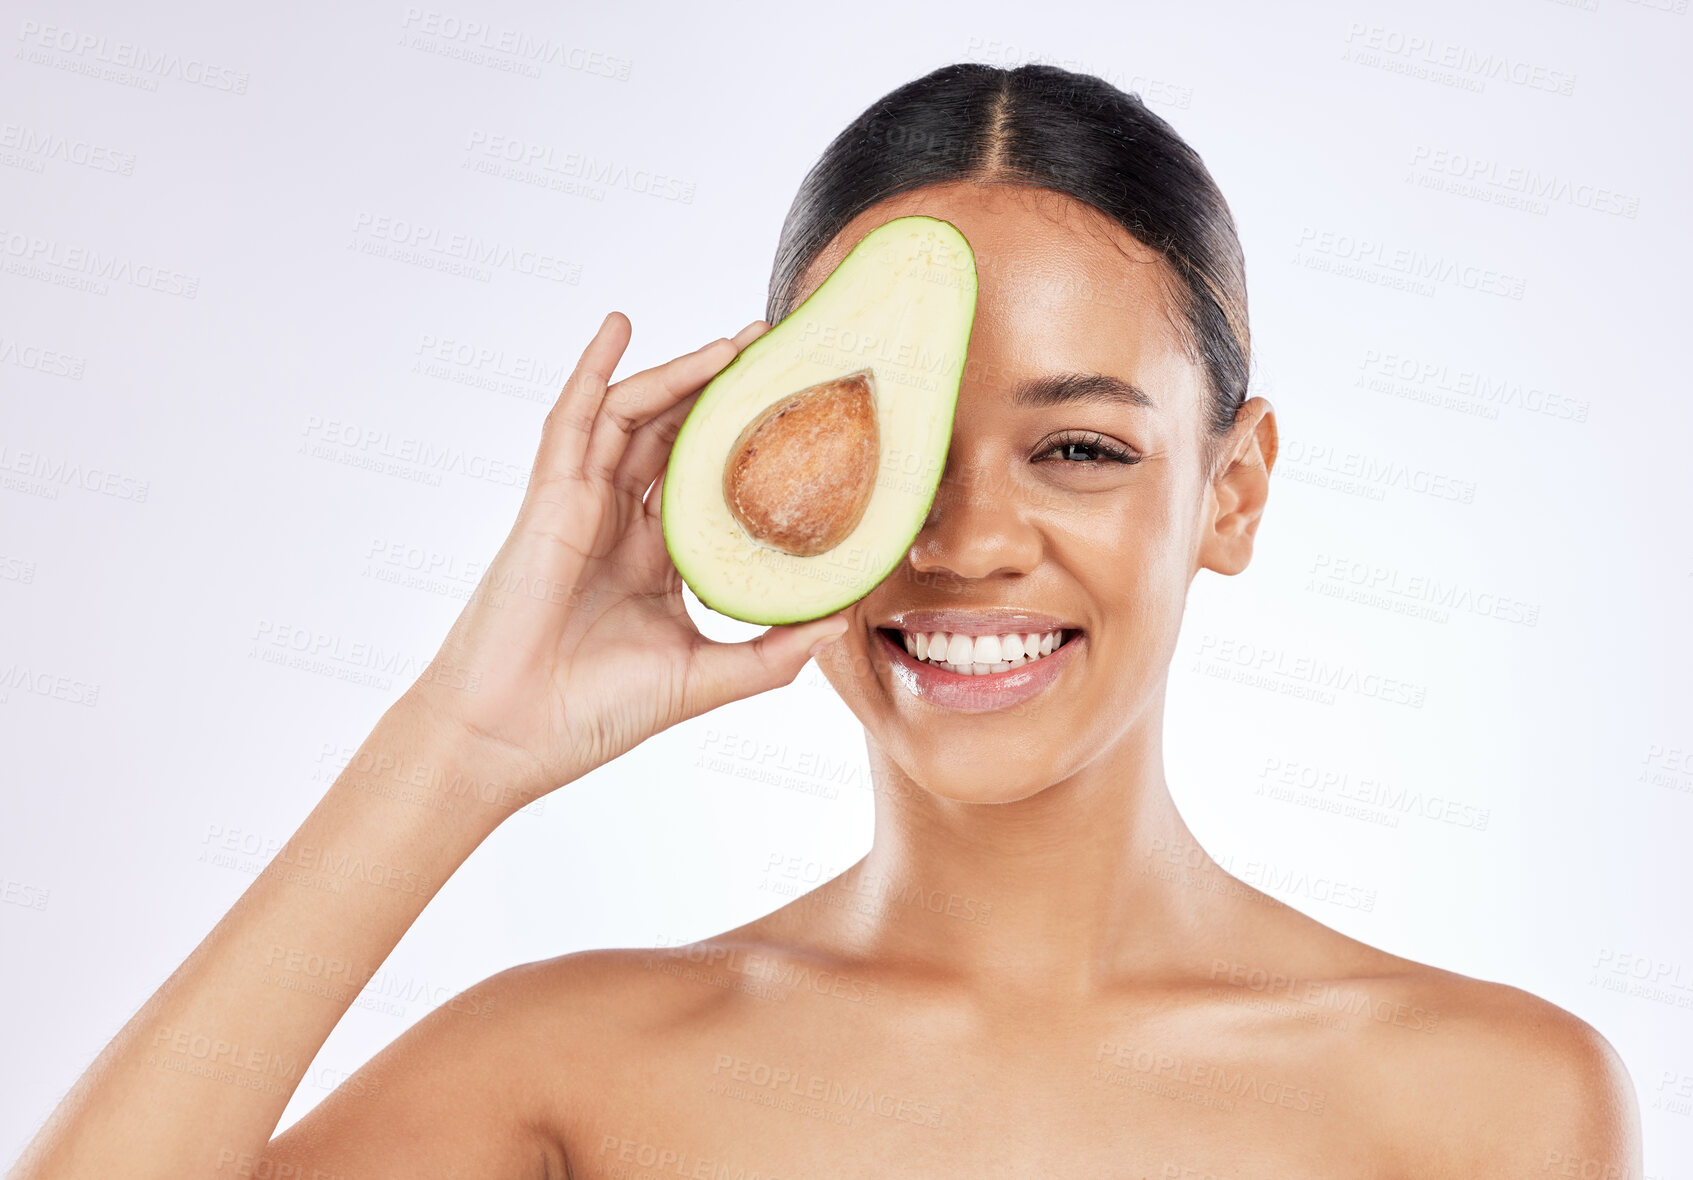 Buy stock photo Shot of a young woman covering her eye with an avocado against a studio background